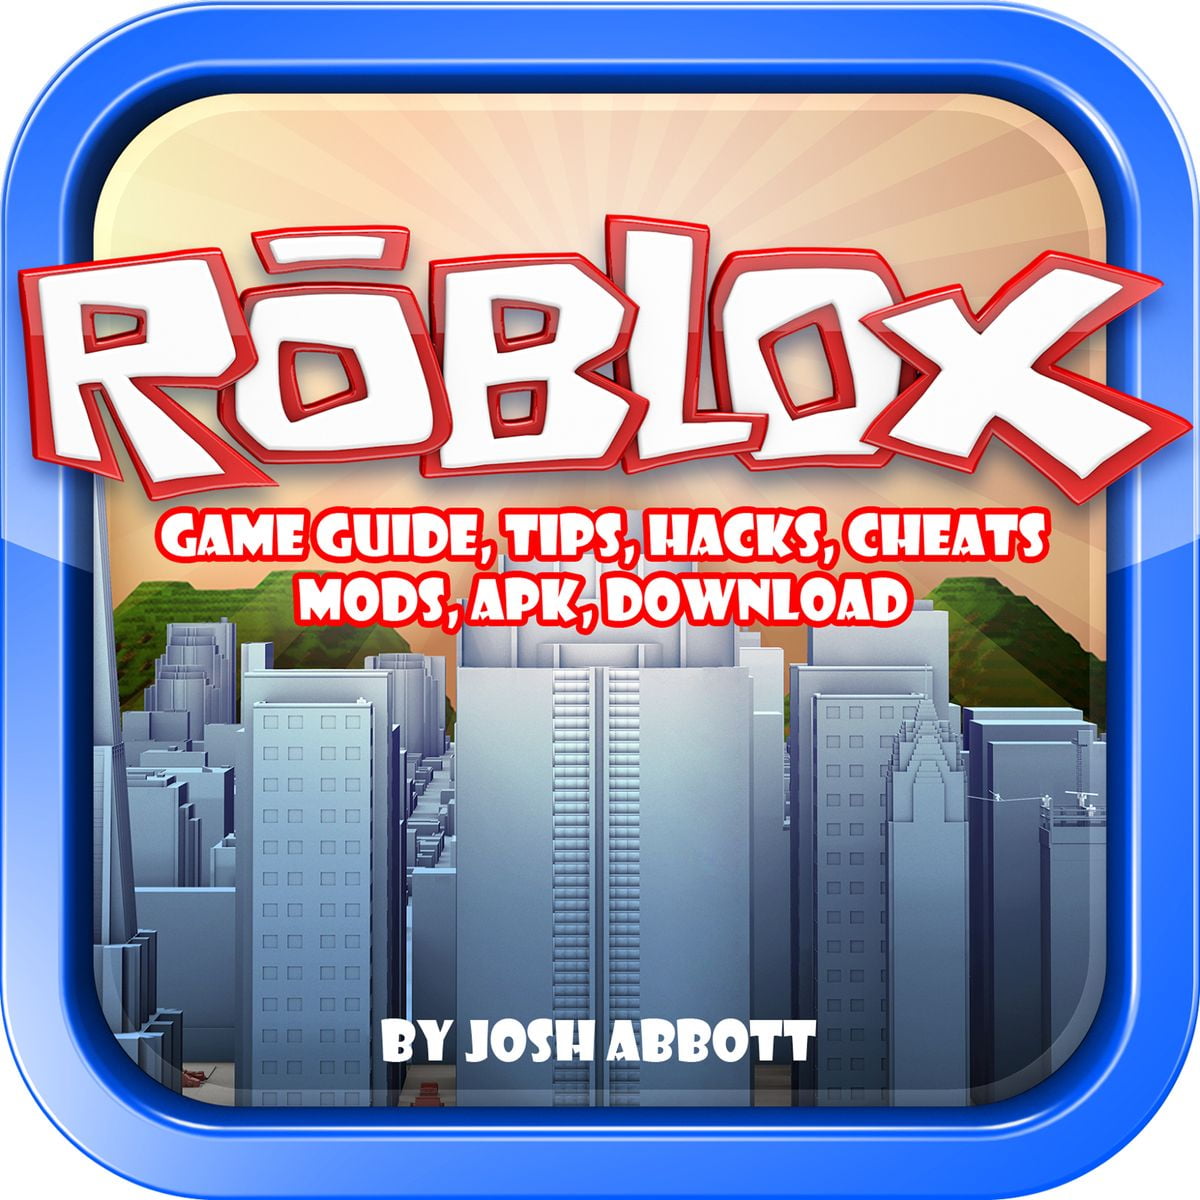 Roblox Game Guide Tips Hacks Cheats Mods Apk Download